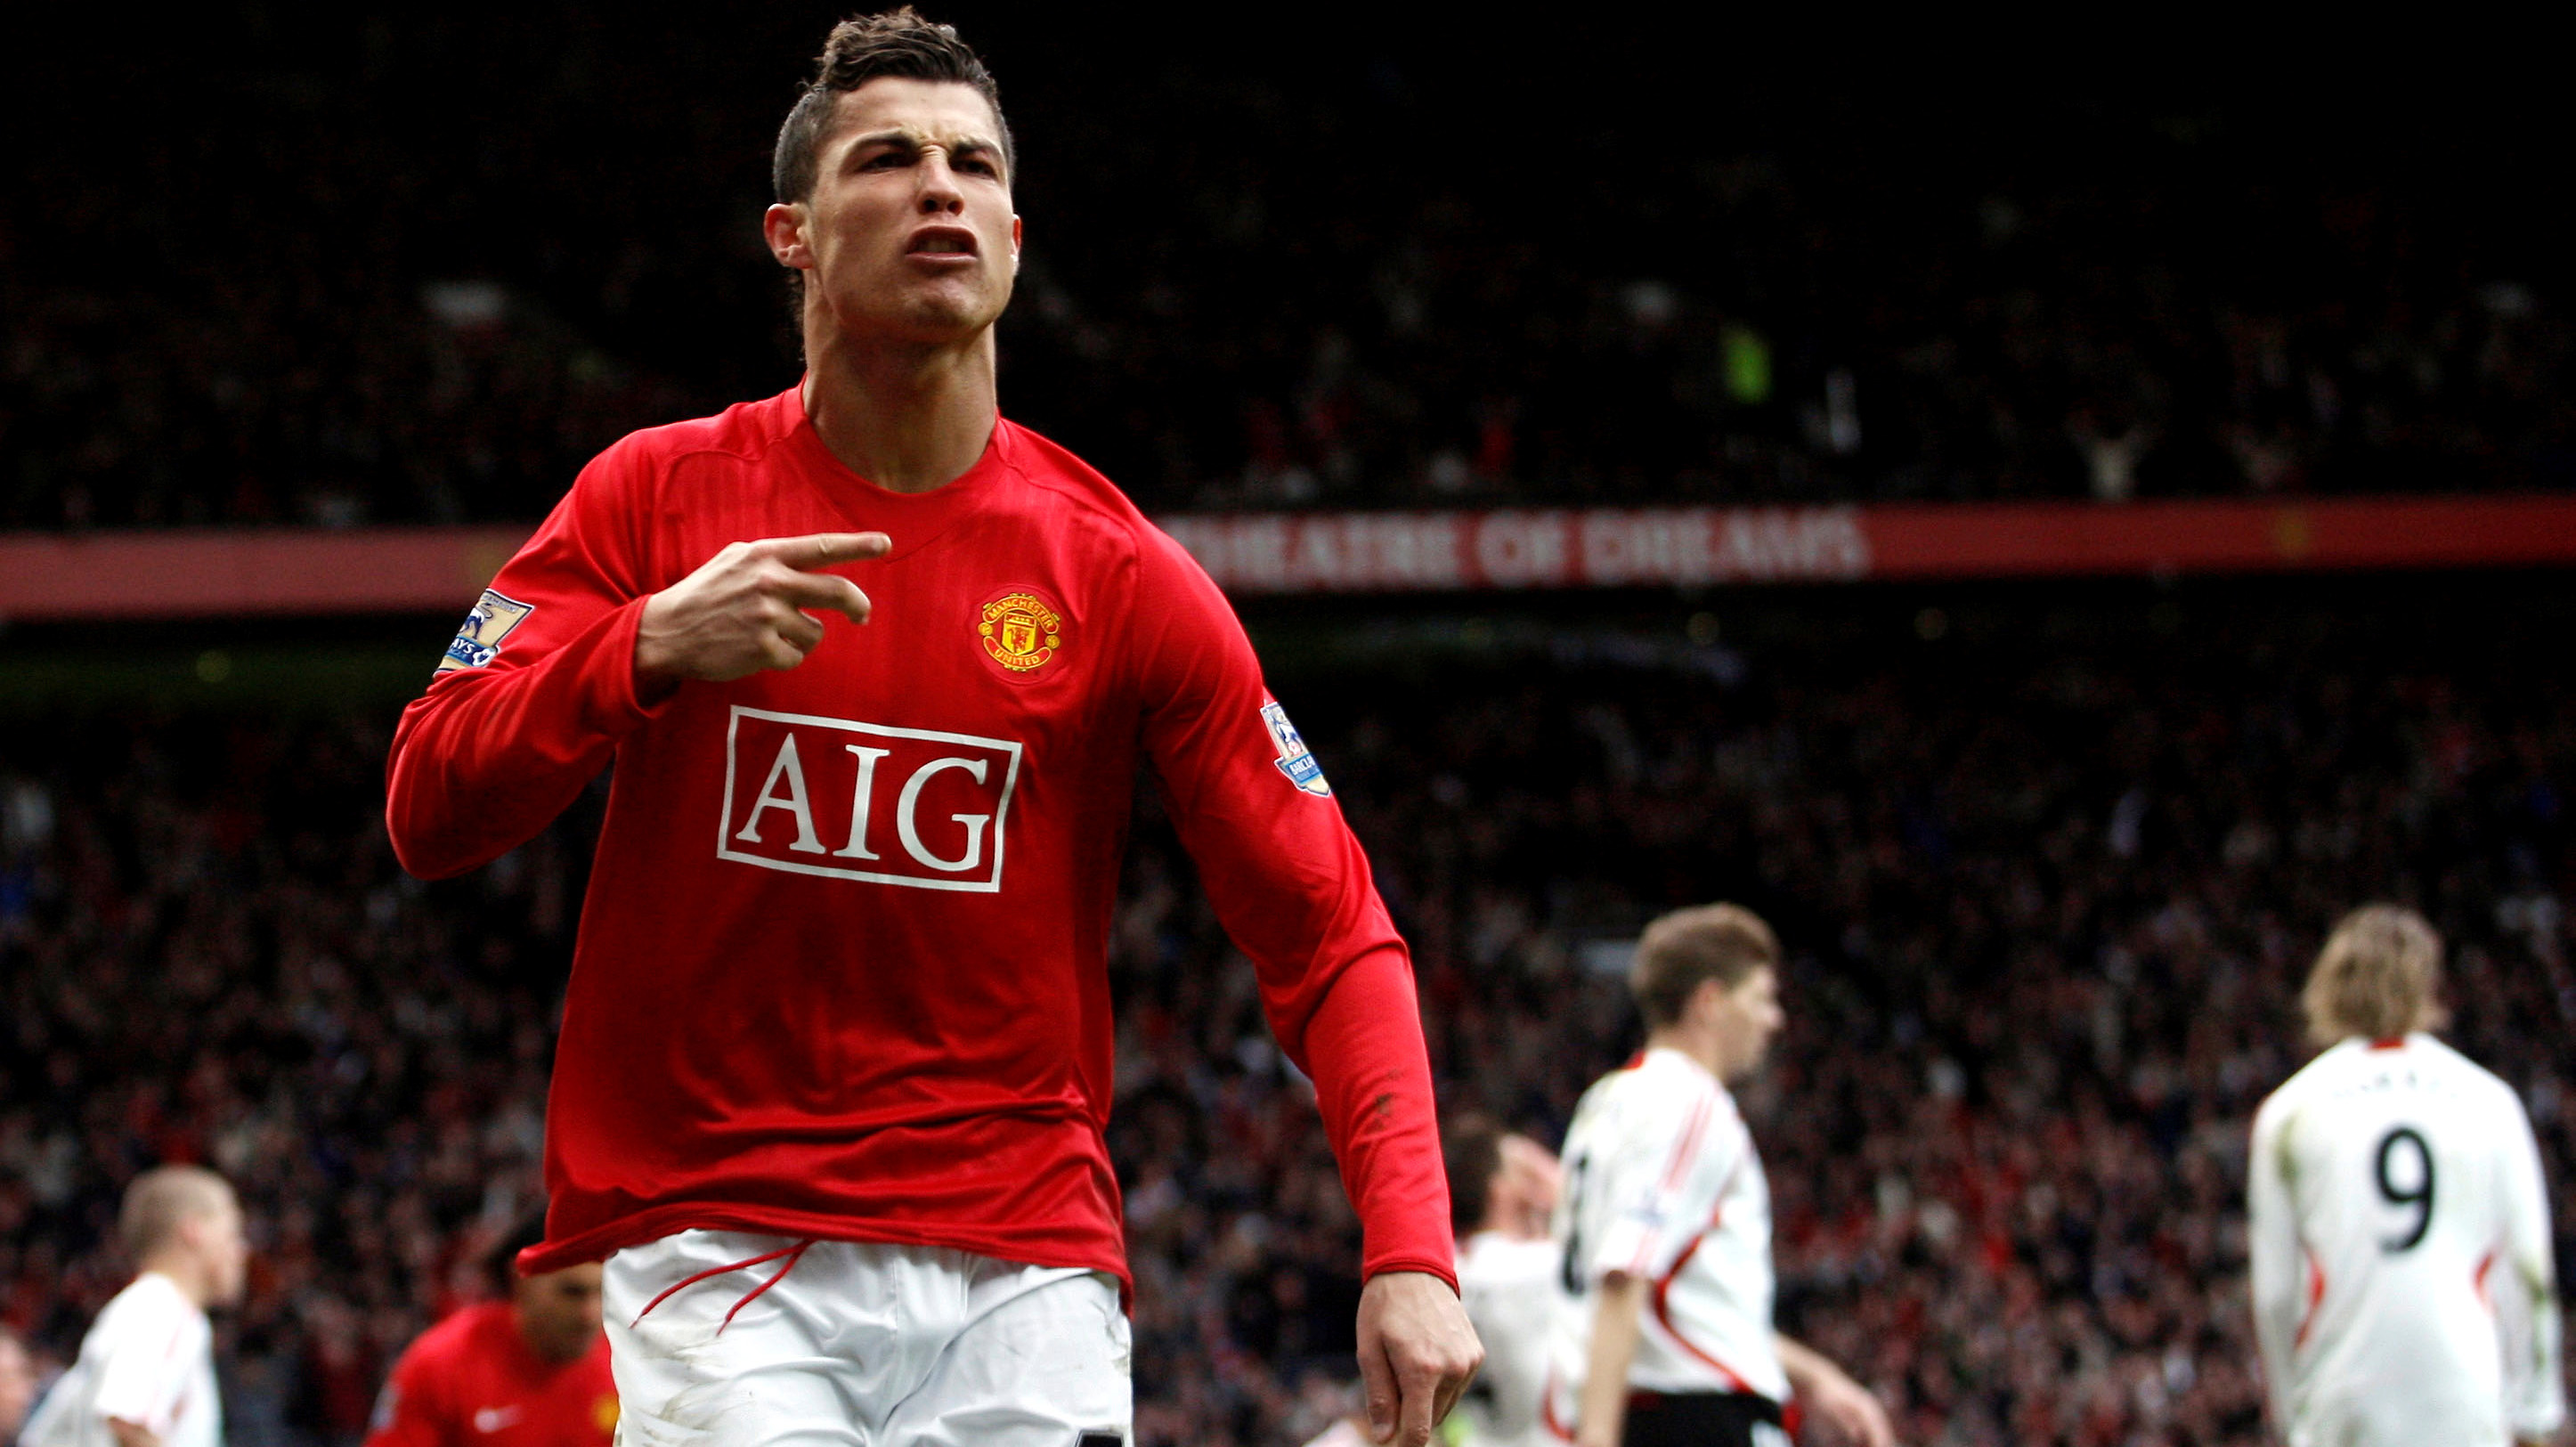 File Photo: Manchester United's Cristiano Ronaldo Celebrates Scoring His Team's Second Goal In The 79th Minute Of Their 3 0 Victory Over Liverpool In The Premier League.